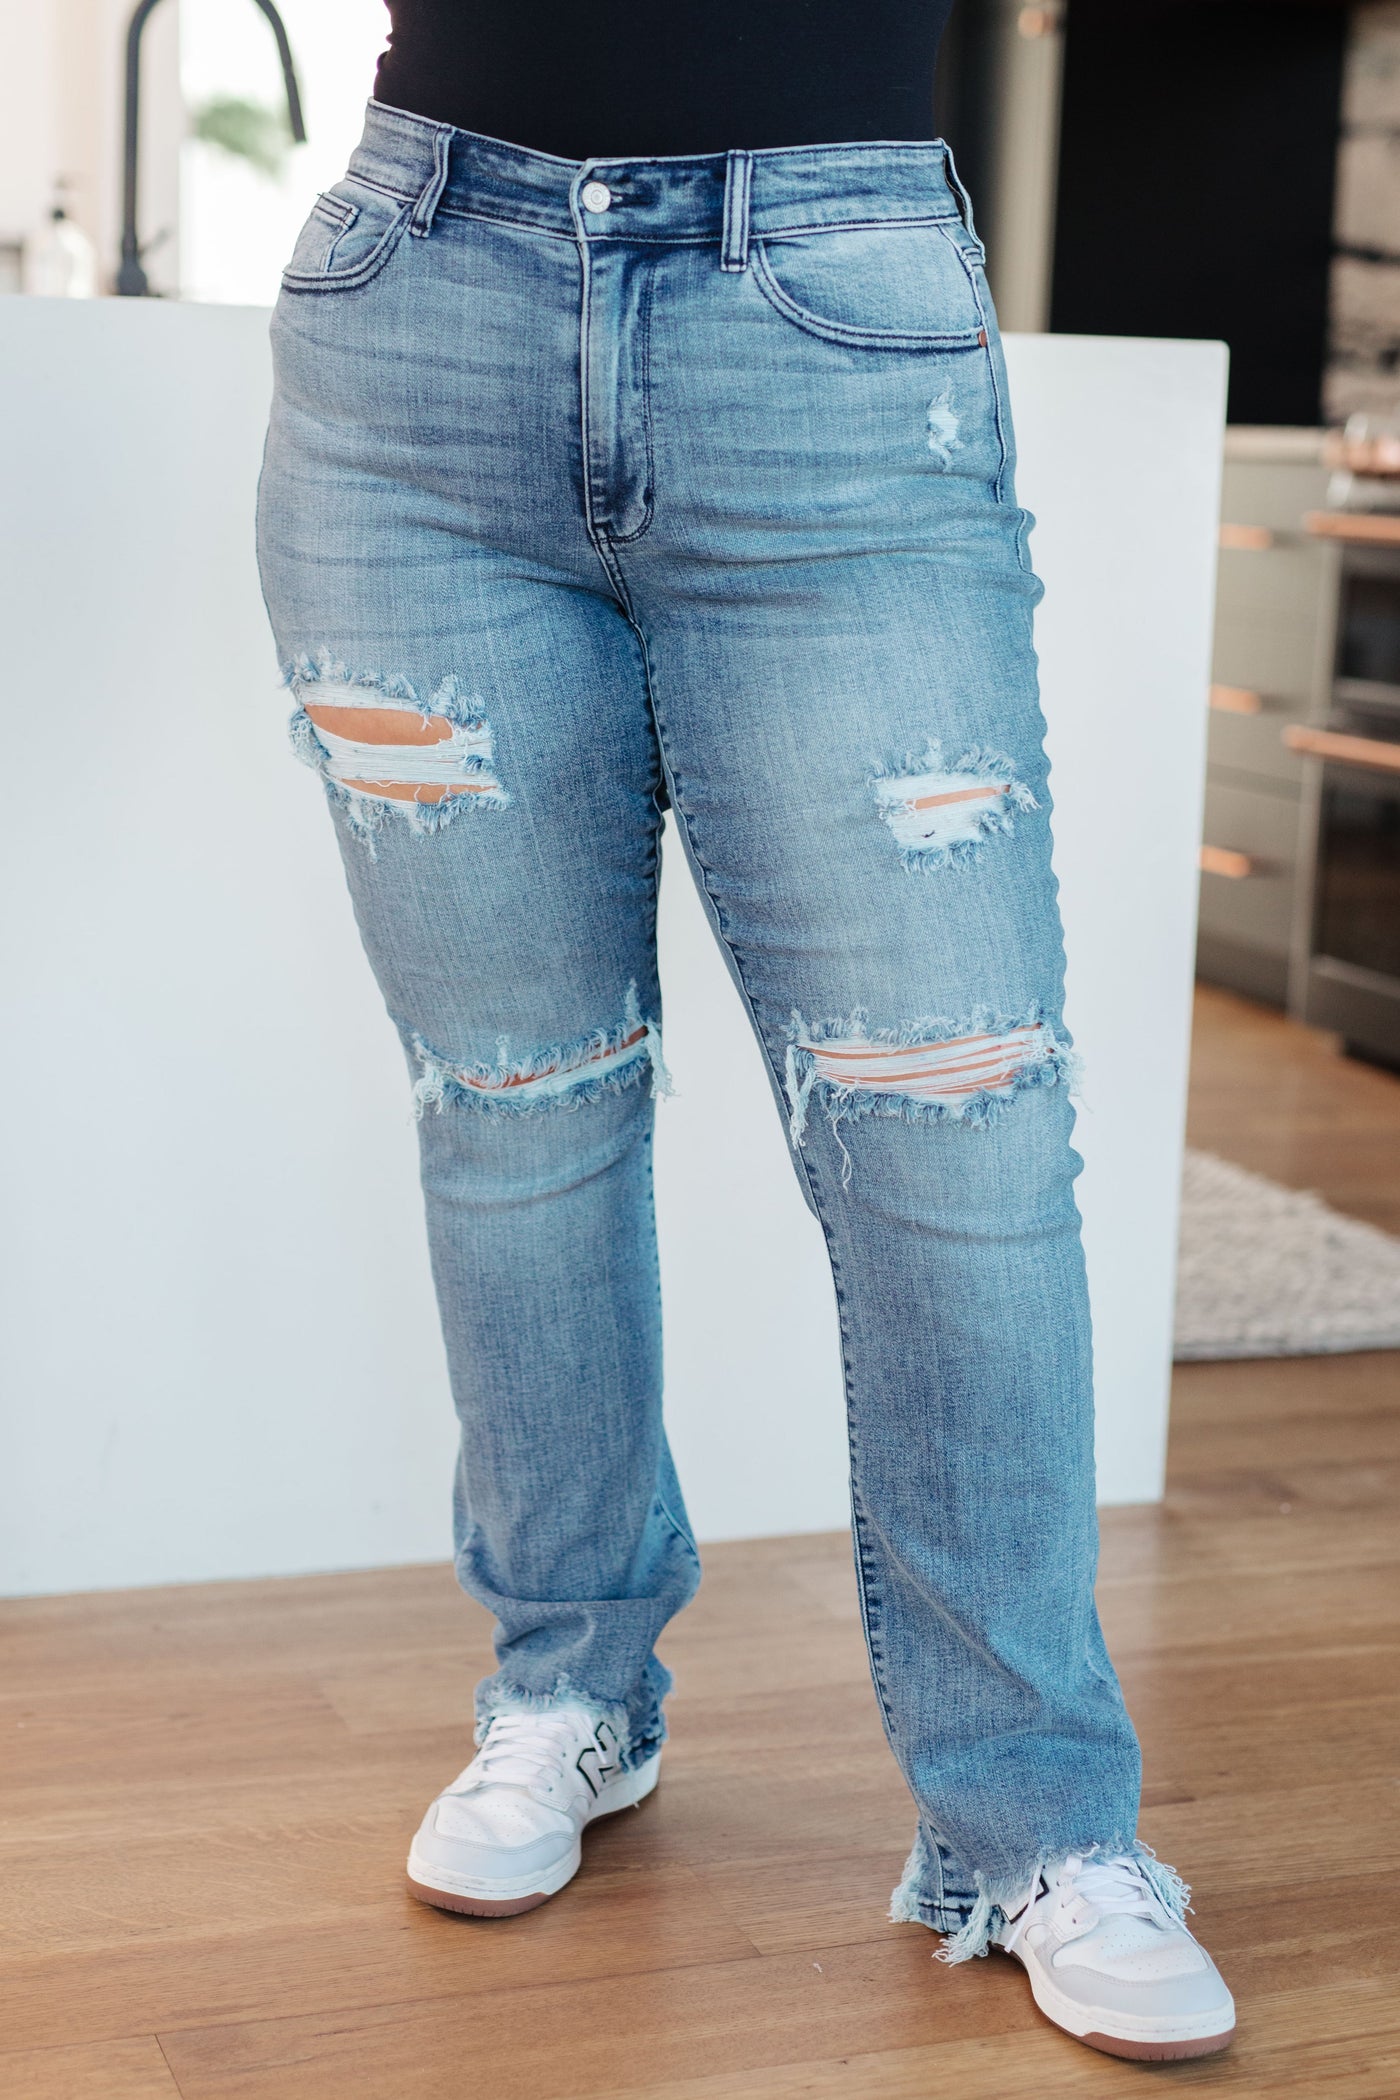 O'Hara Mid Rise Destroyed Straight Jeans in Medium Wash